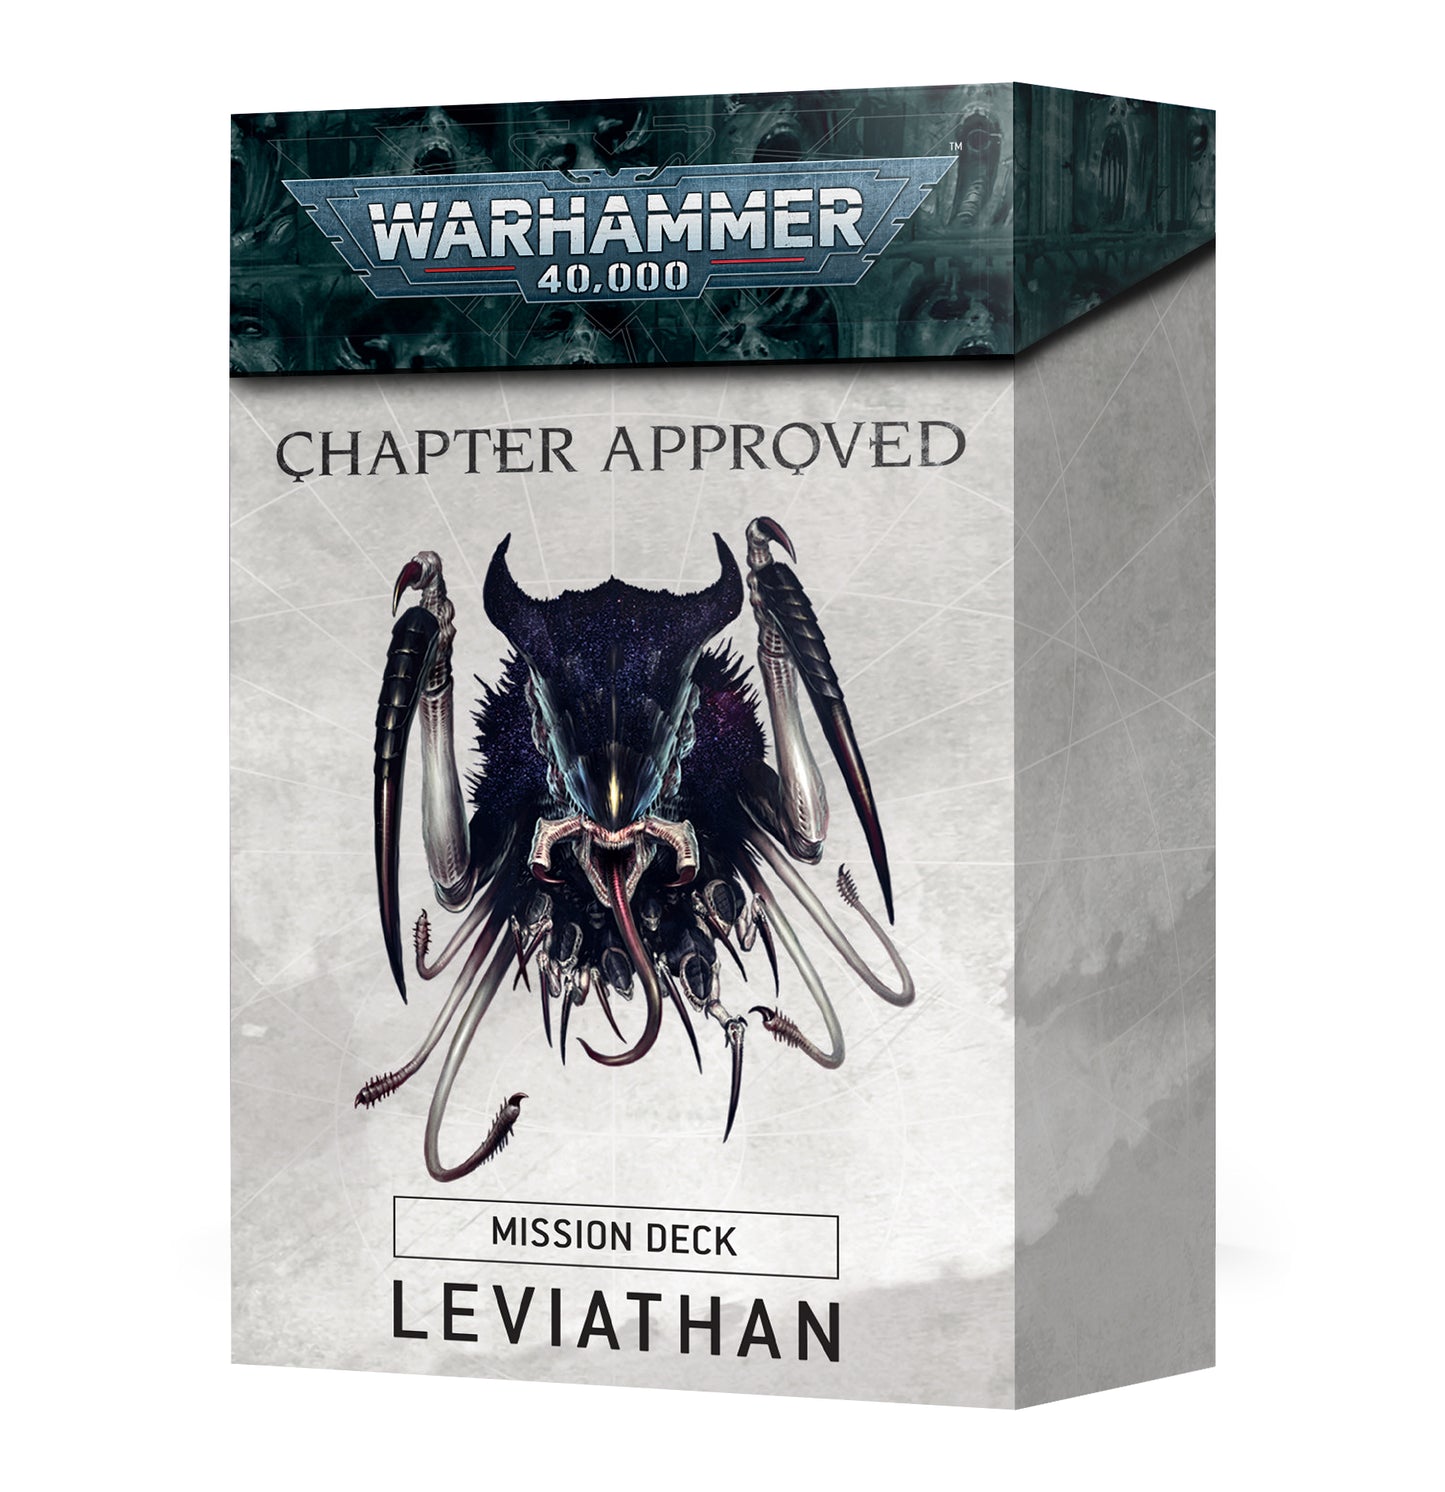 Chapter Approved Leviathon Mission Deck